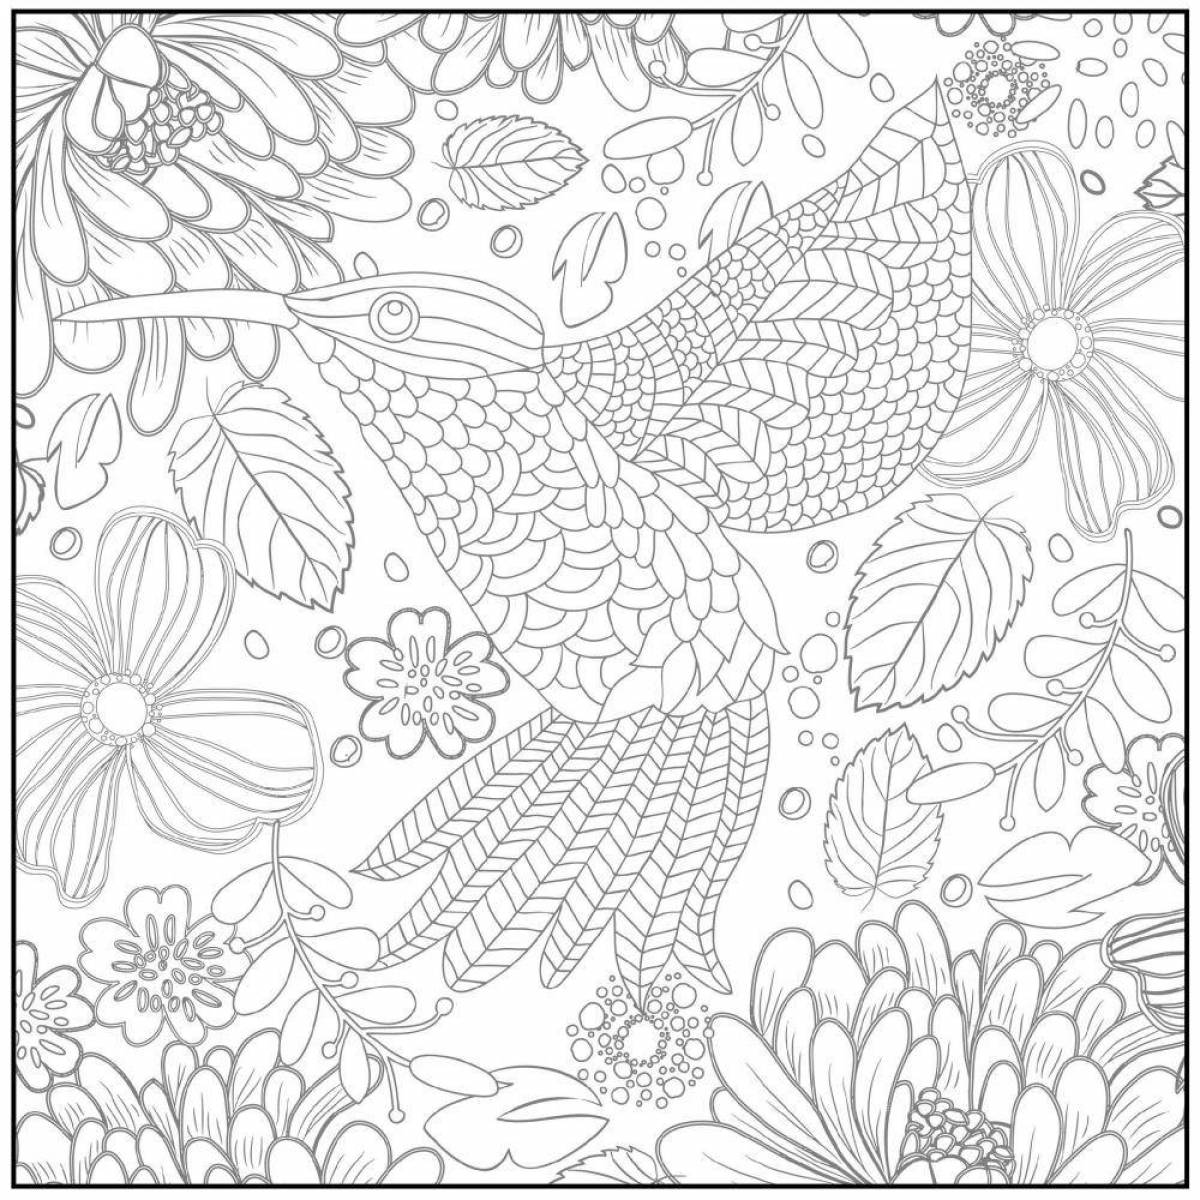 Fun coloring book relaxation for kids